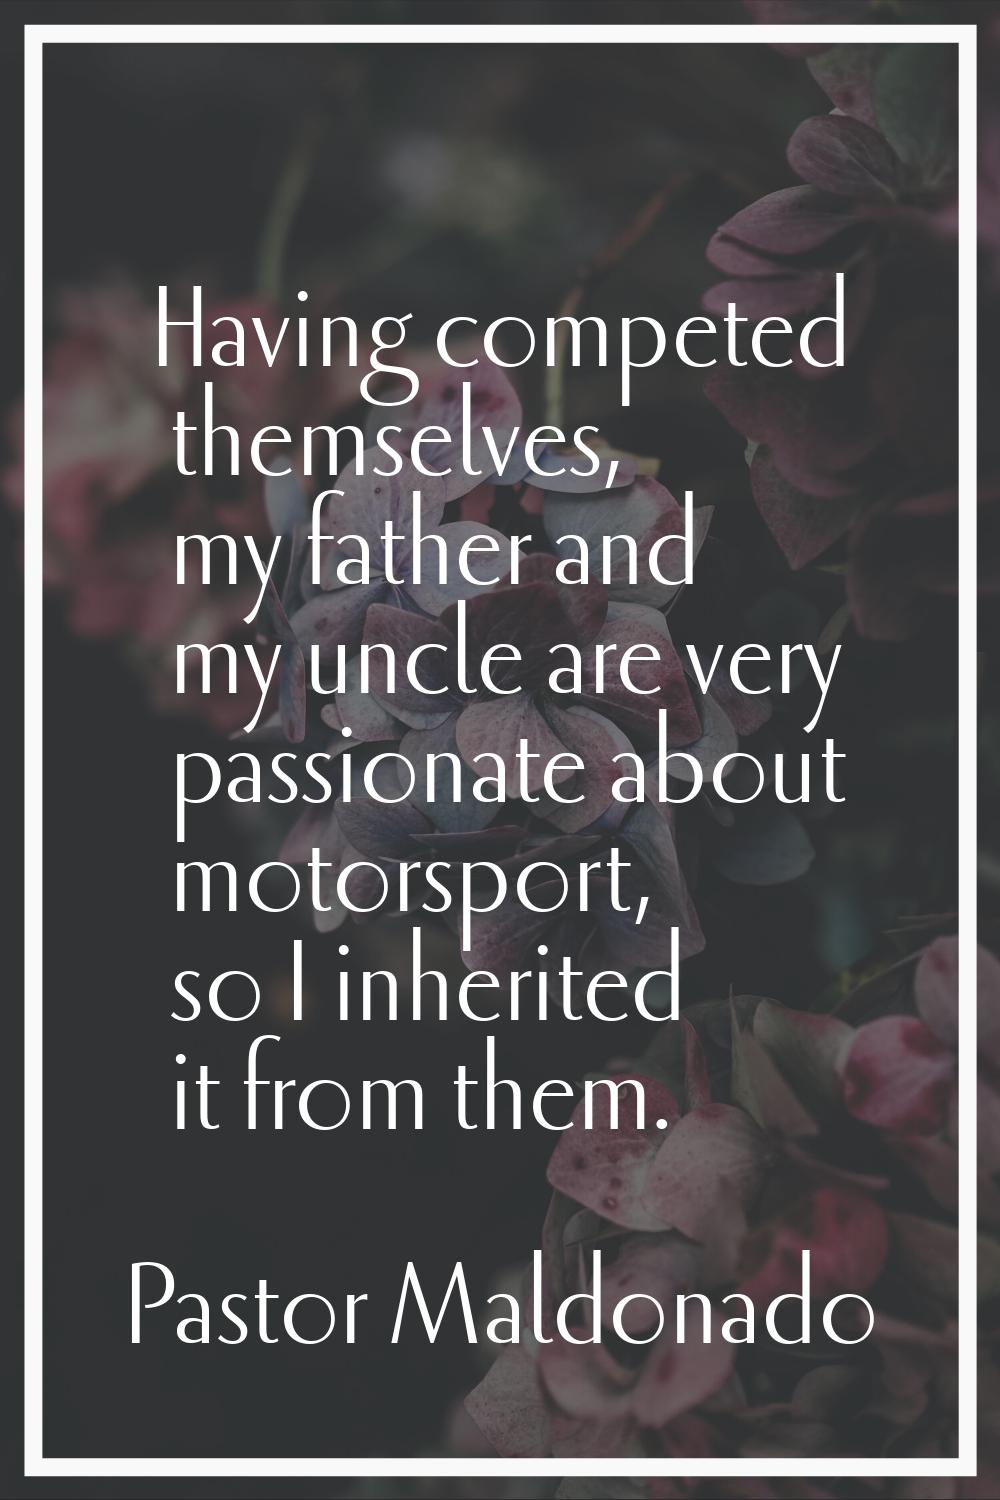 Having competed themselves, my father and my uncle are very passionate about motorsport, so I inher